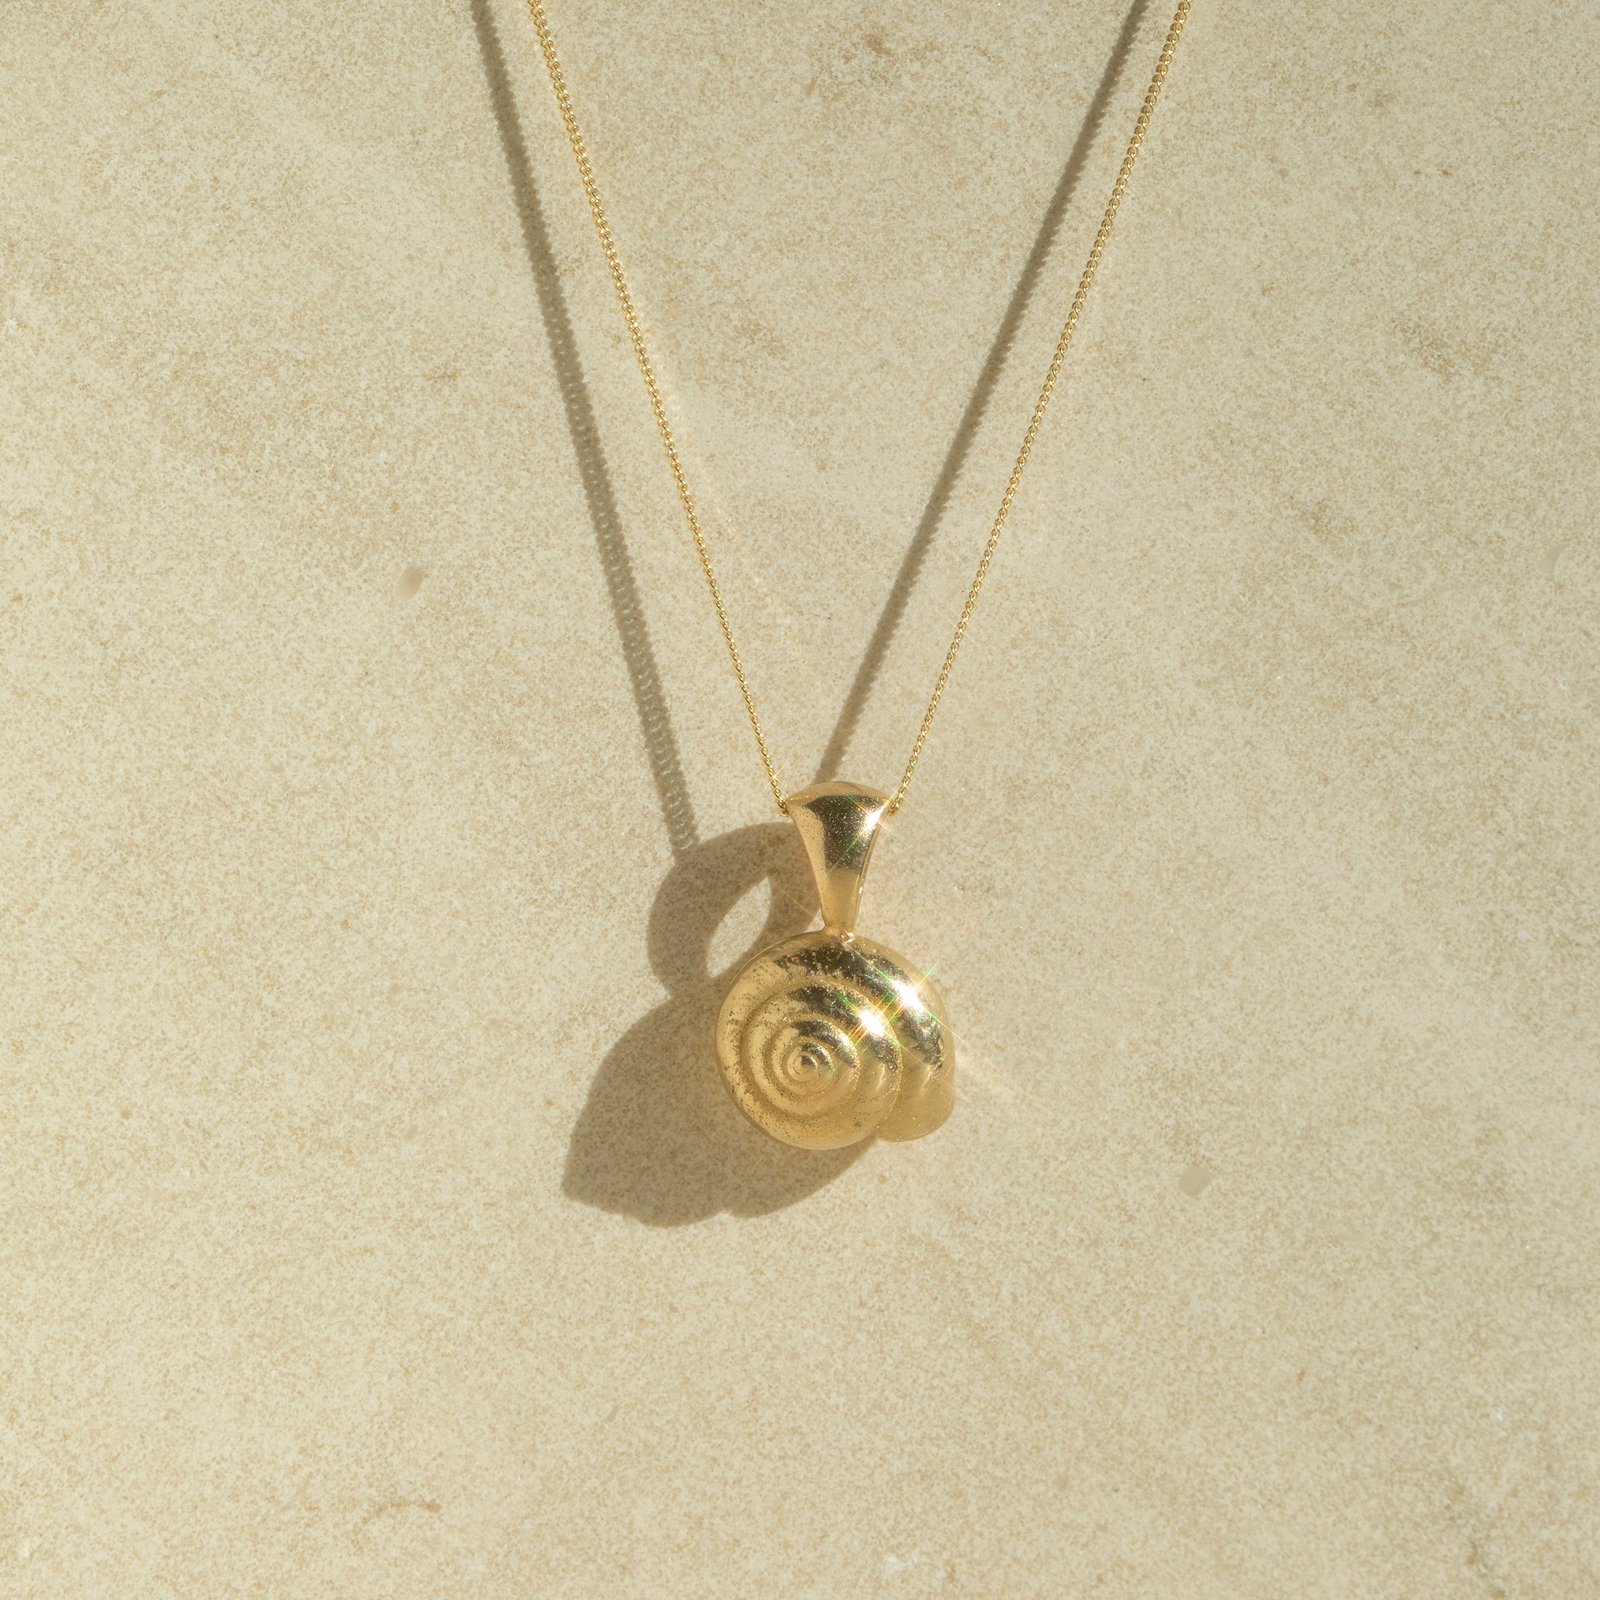 Handcrafted Ornate 14k Gold Filled Snail Shell Necklace With 14K Gold Foil  - Etsy